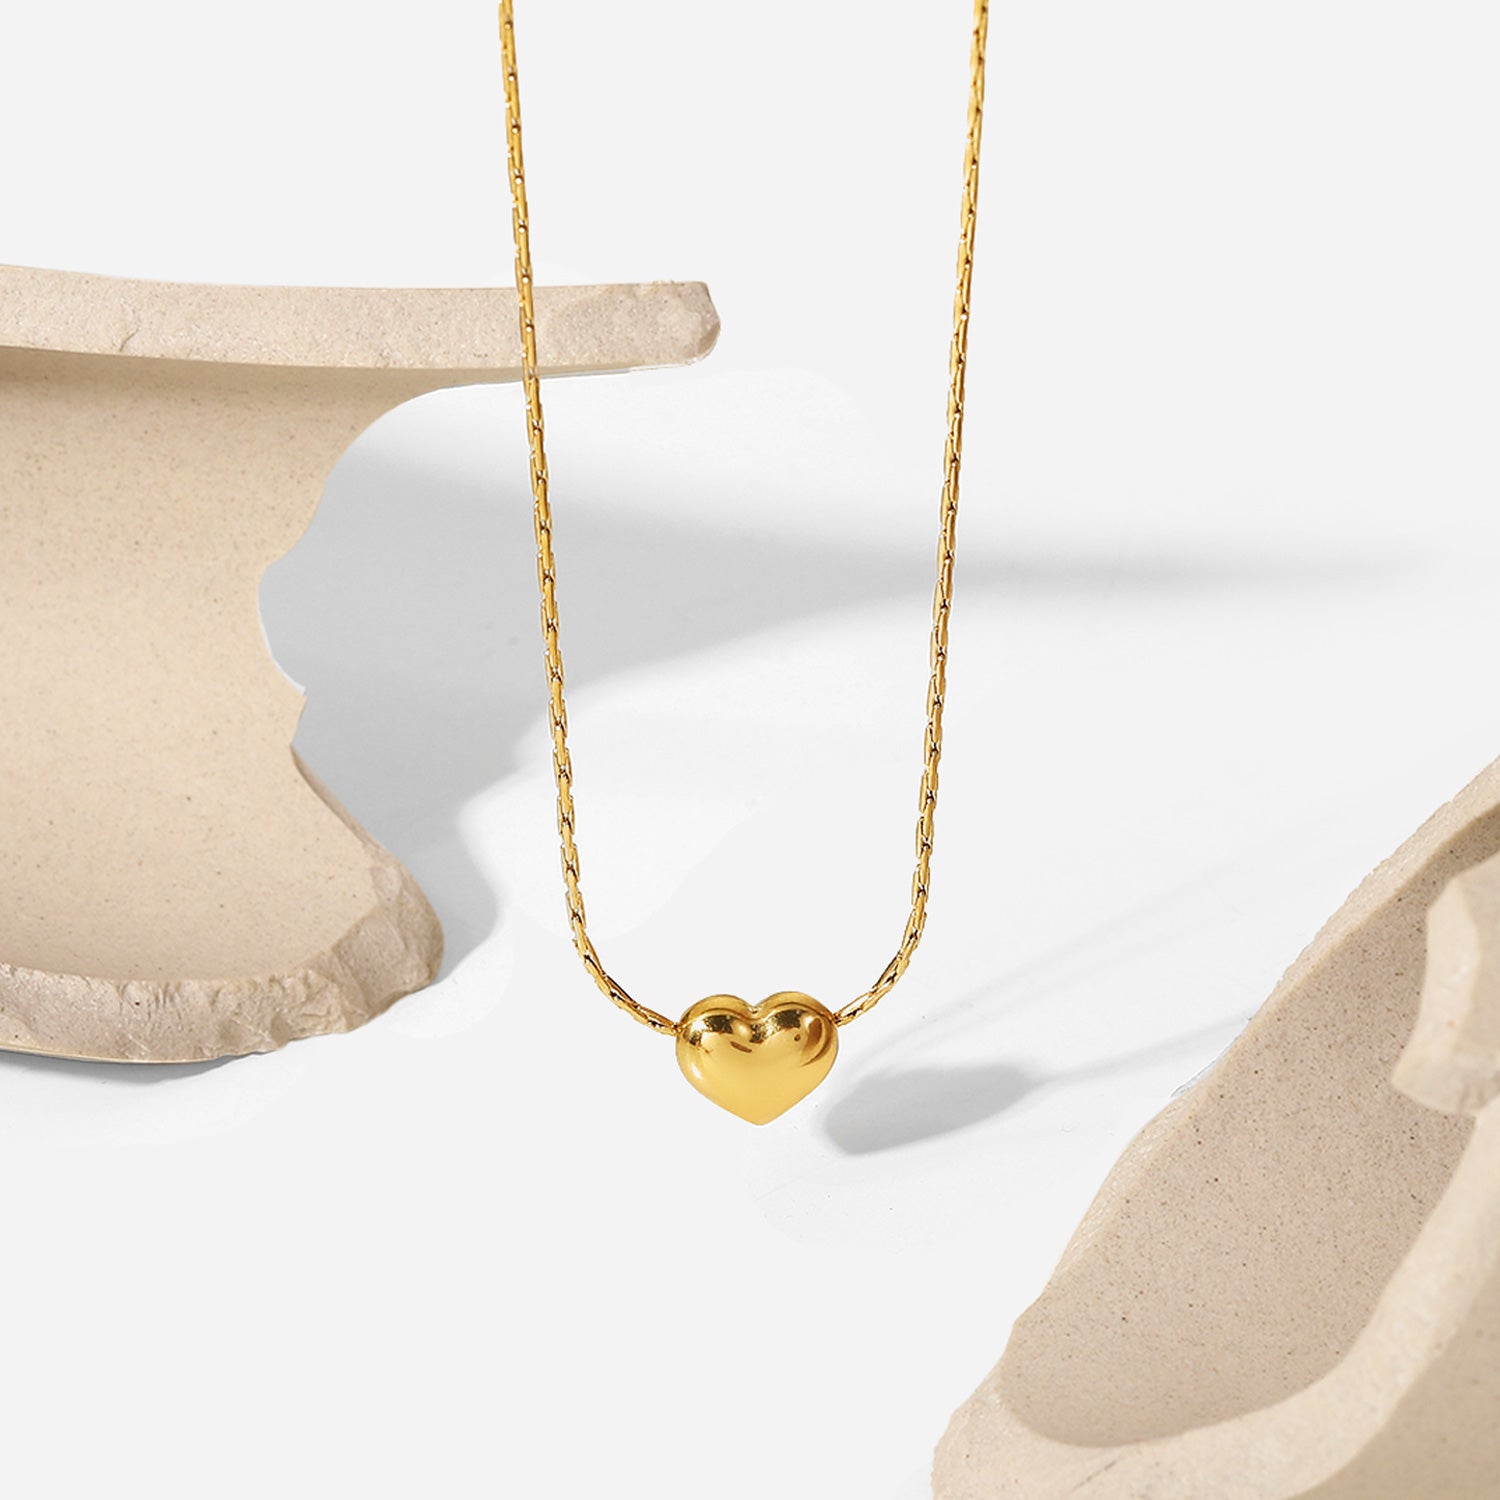 REFLECTION CHAIN NECKLACE (18K GOLD PLATED) – KIRSTIN ASH (Australia)